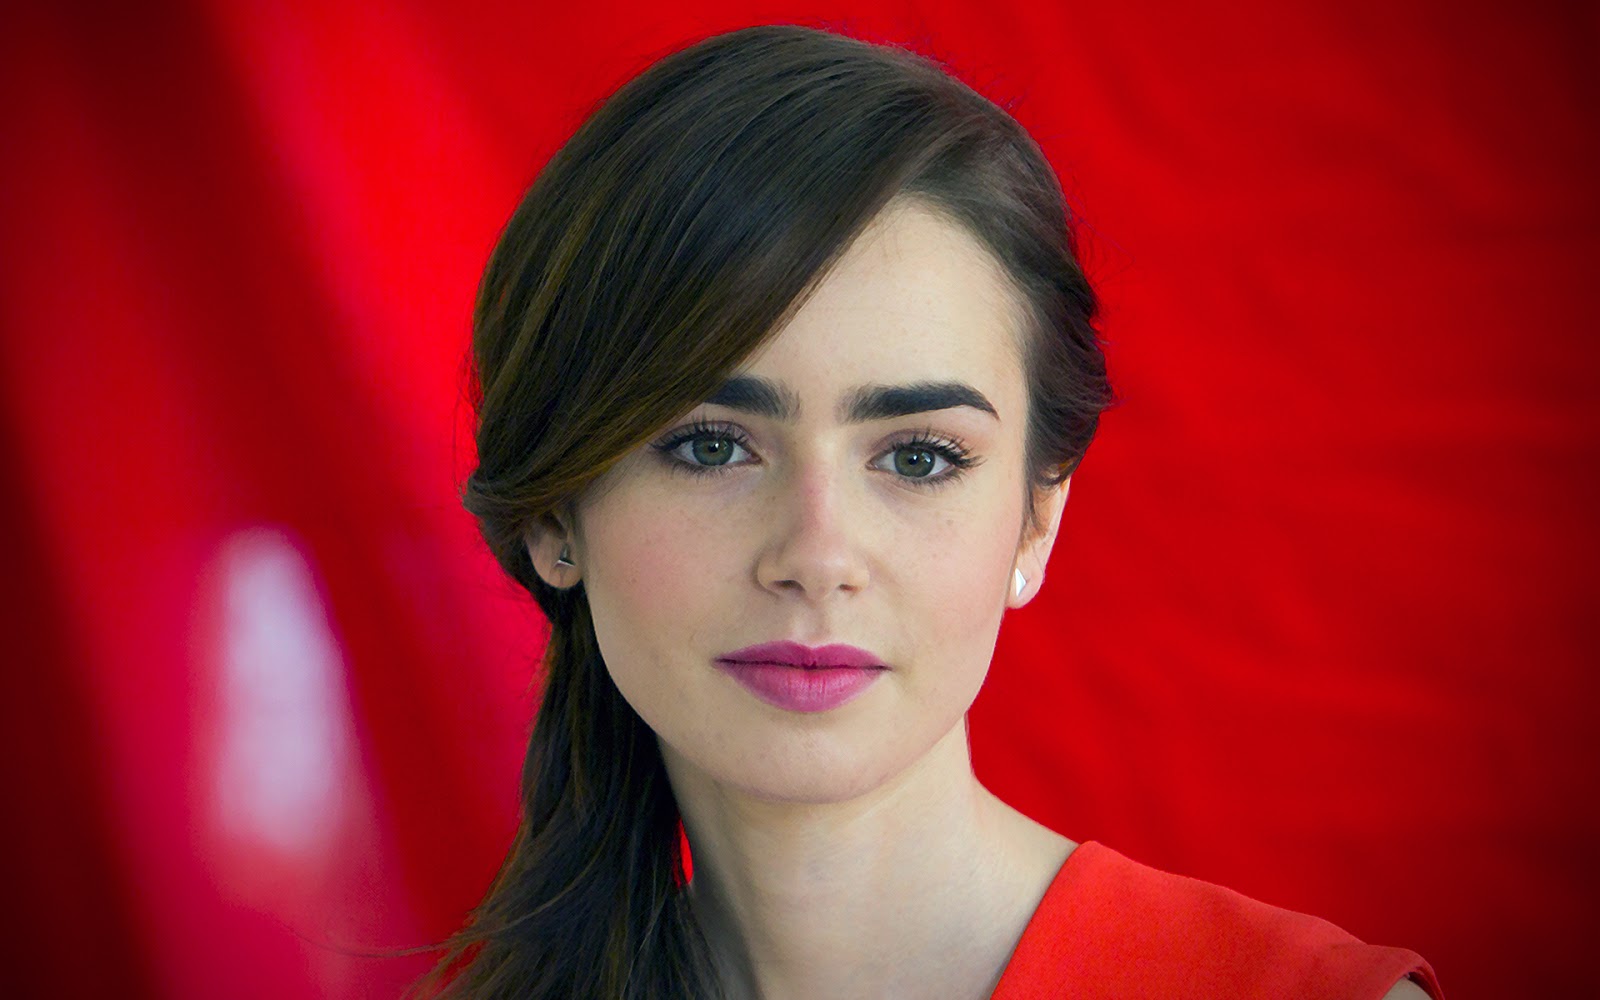 lily collins tapete,haar,gesicht,lippe,augenbraue,rot